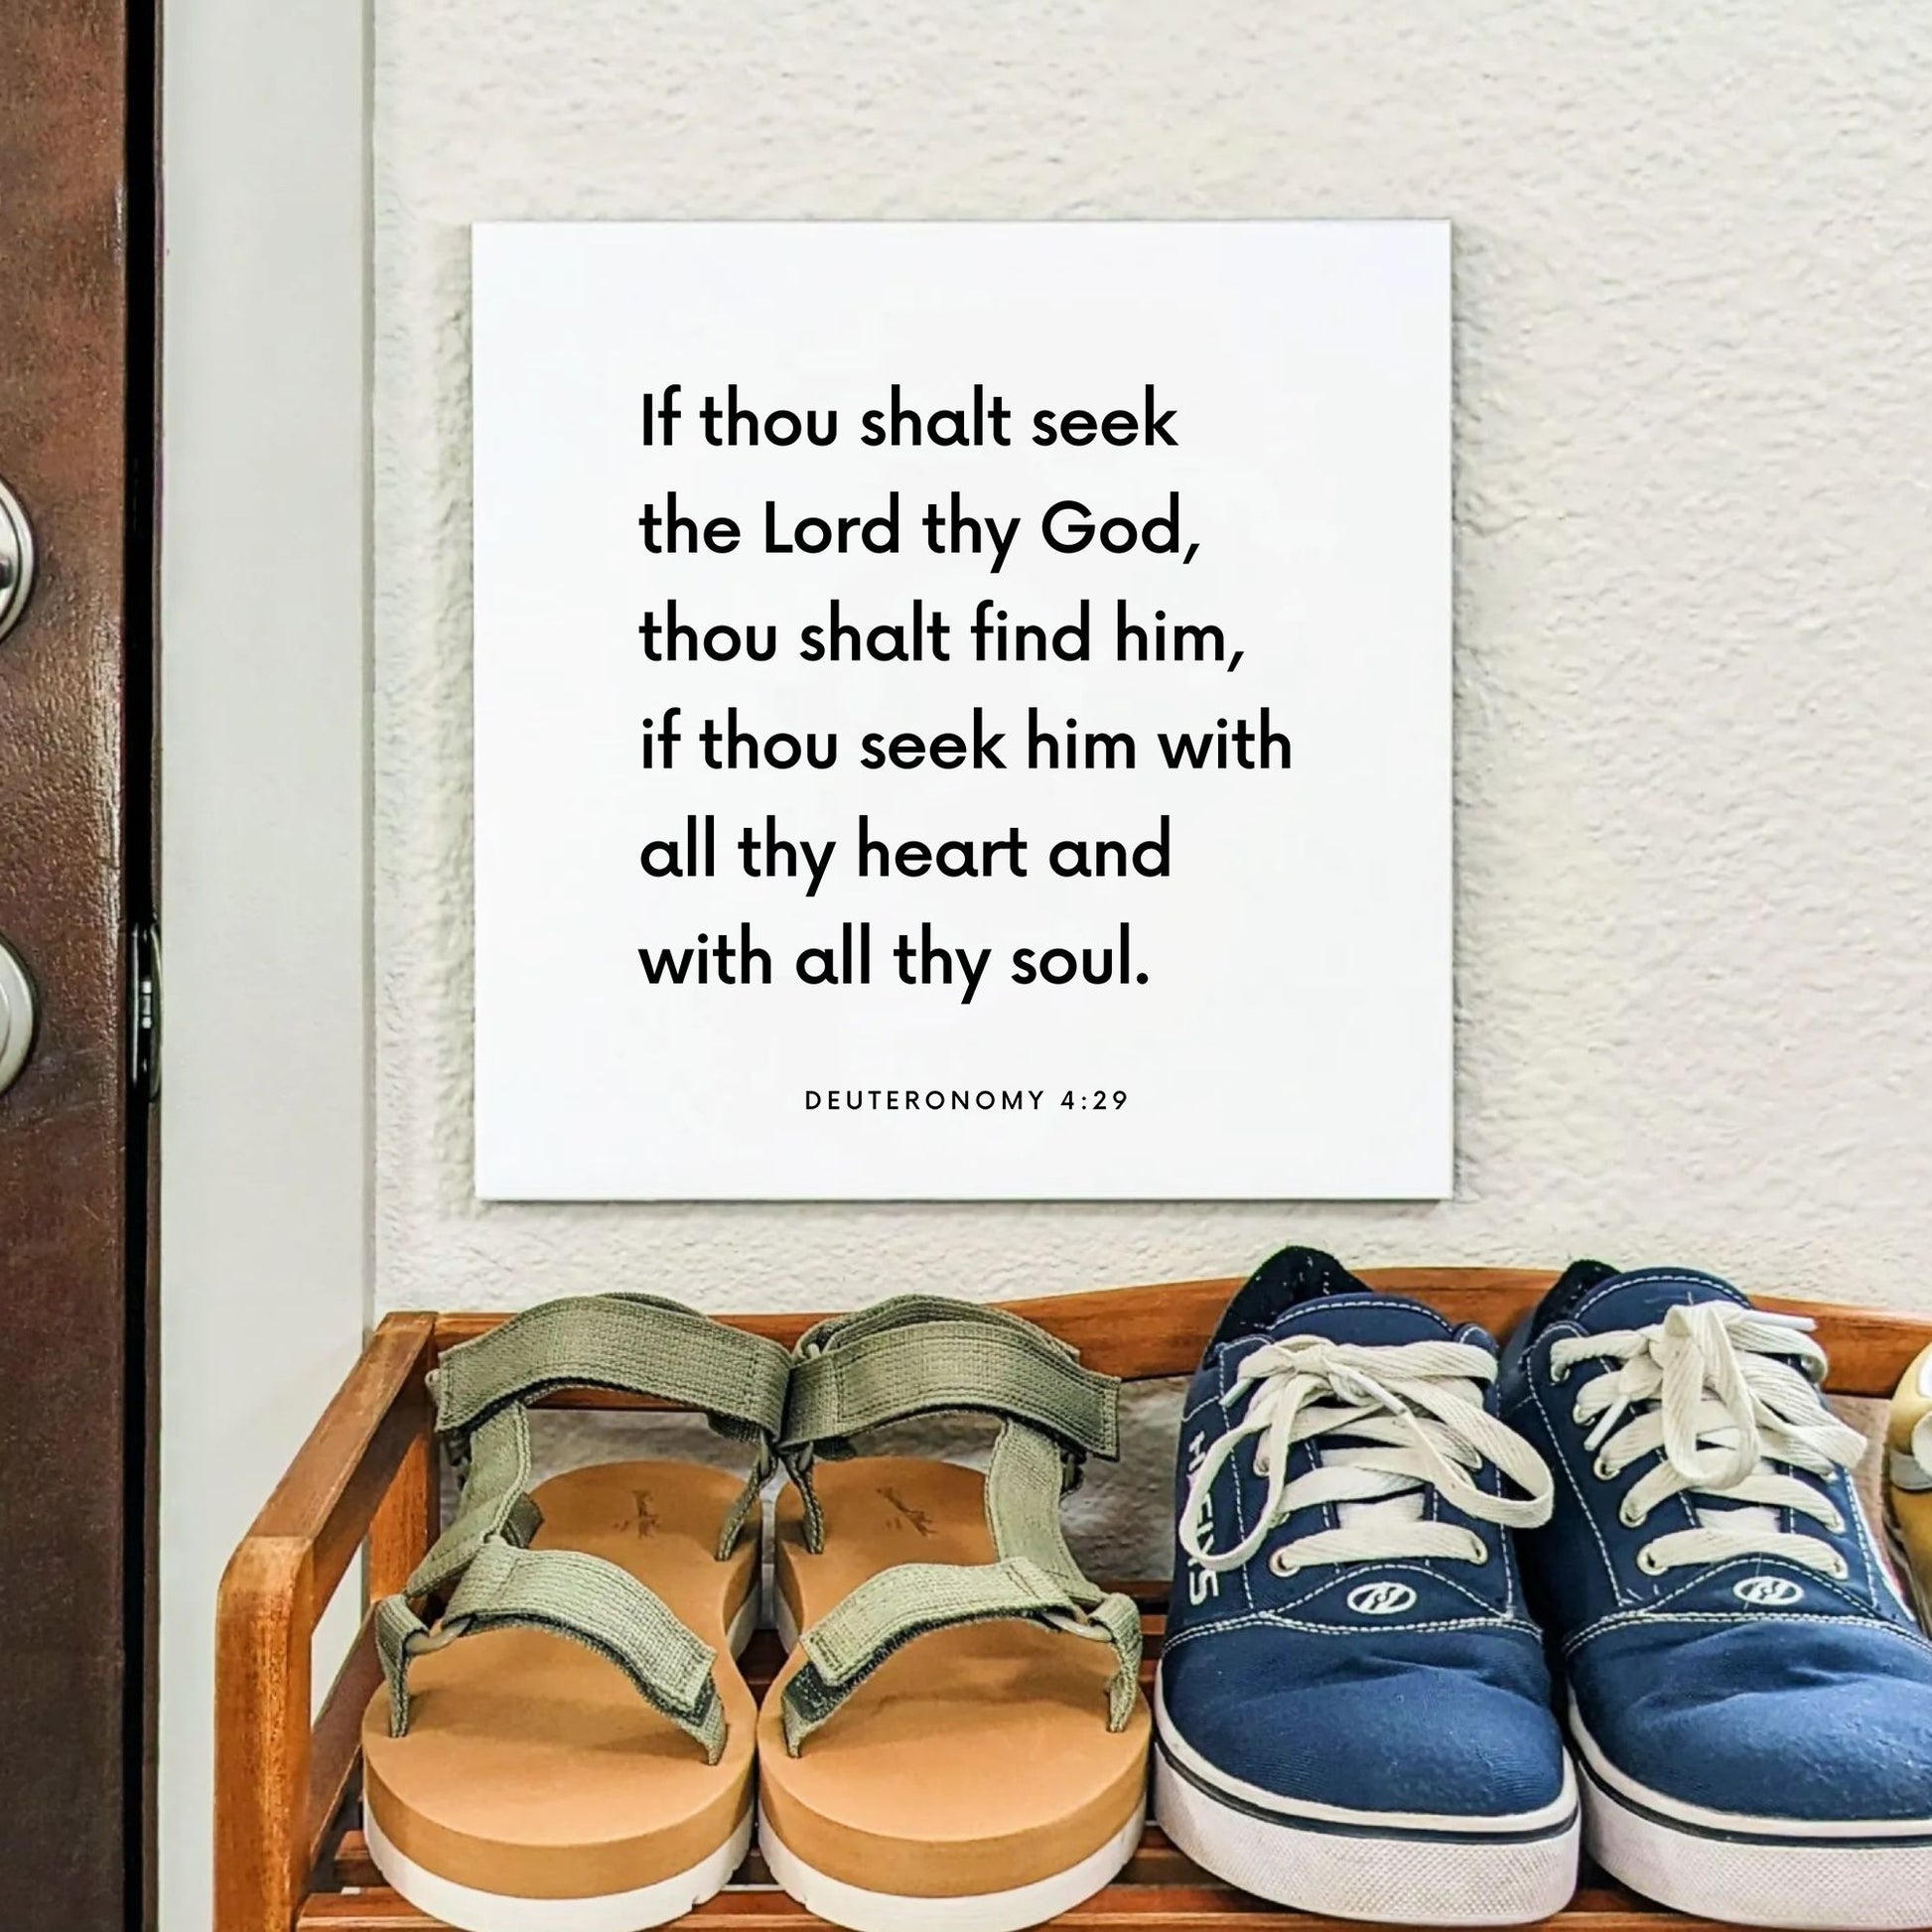 Shoes mouting of the scripture tile for Deuteronomy 4:29 - "If thou shalt seek the Lord thy God, thou shalt find him"